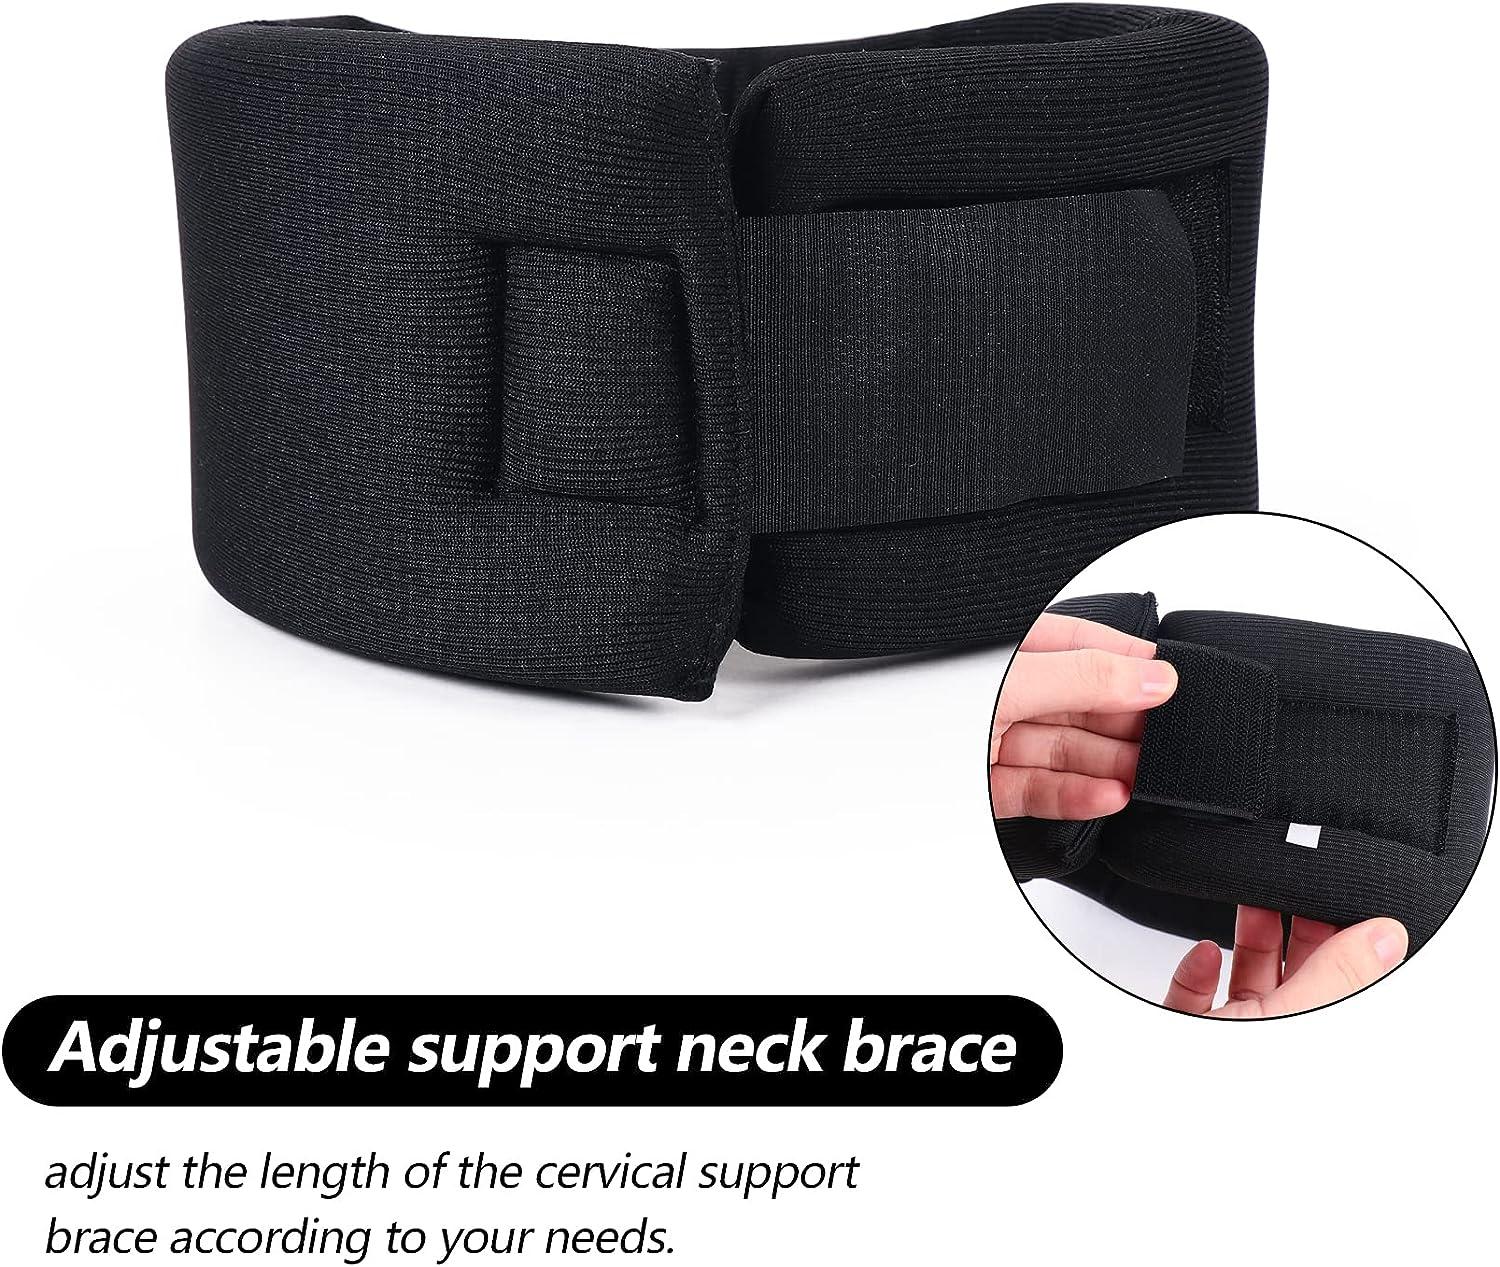 1 Pcs Neck Support Brace - Cervical Collar - Soft Neck Support Relieves  Pain - Wraps Aligns Stabilizes Vertebrae - Can Be Used During  Sleep-airplane T